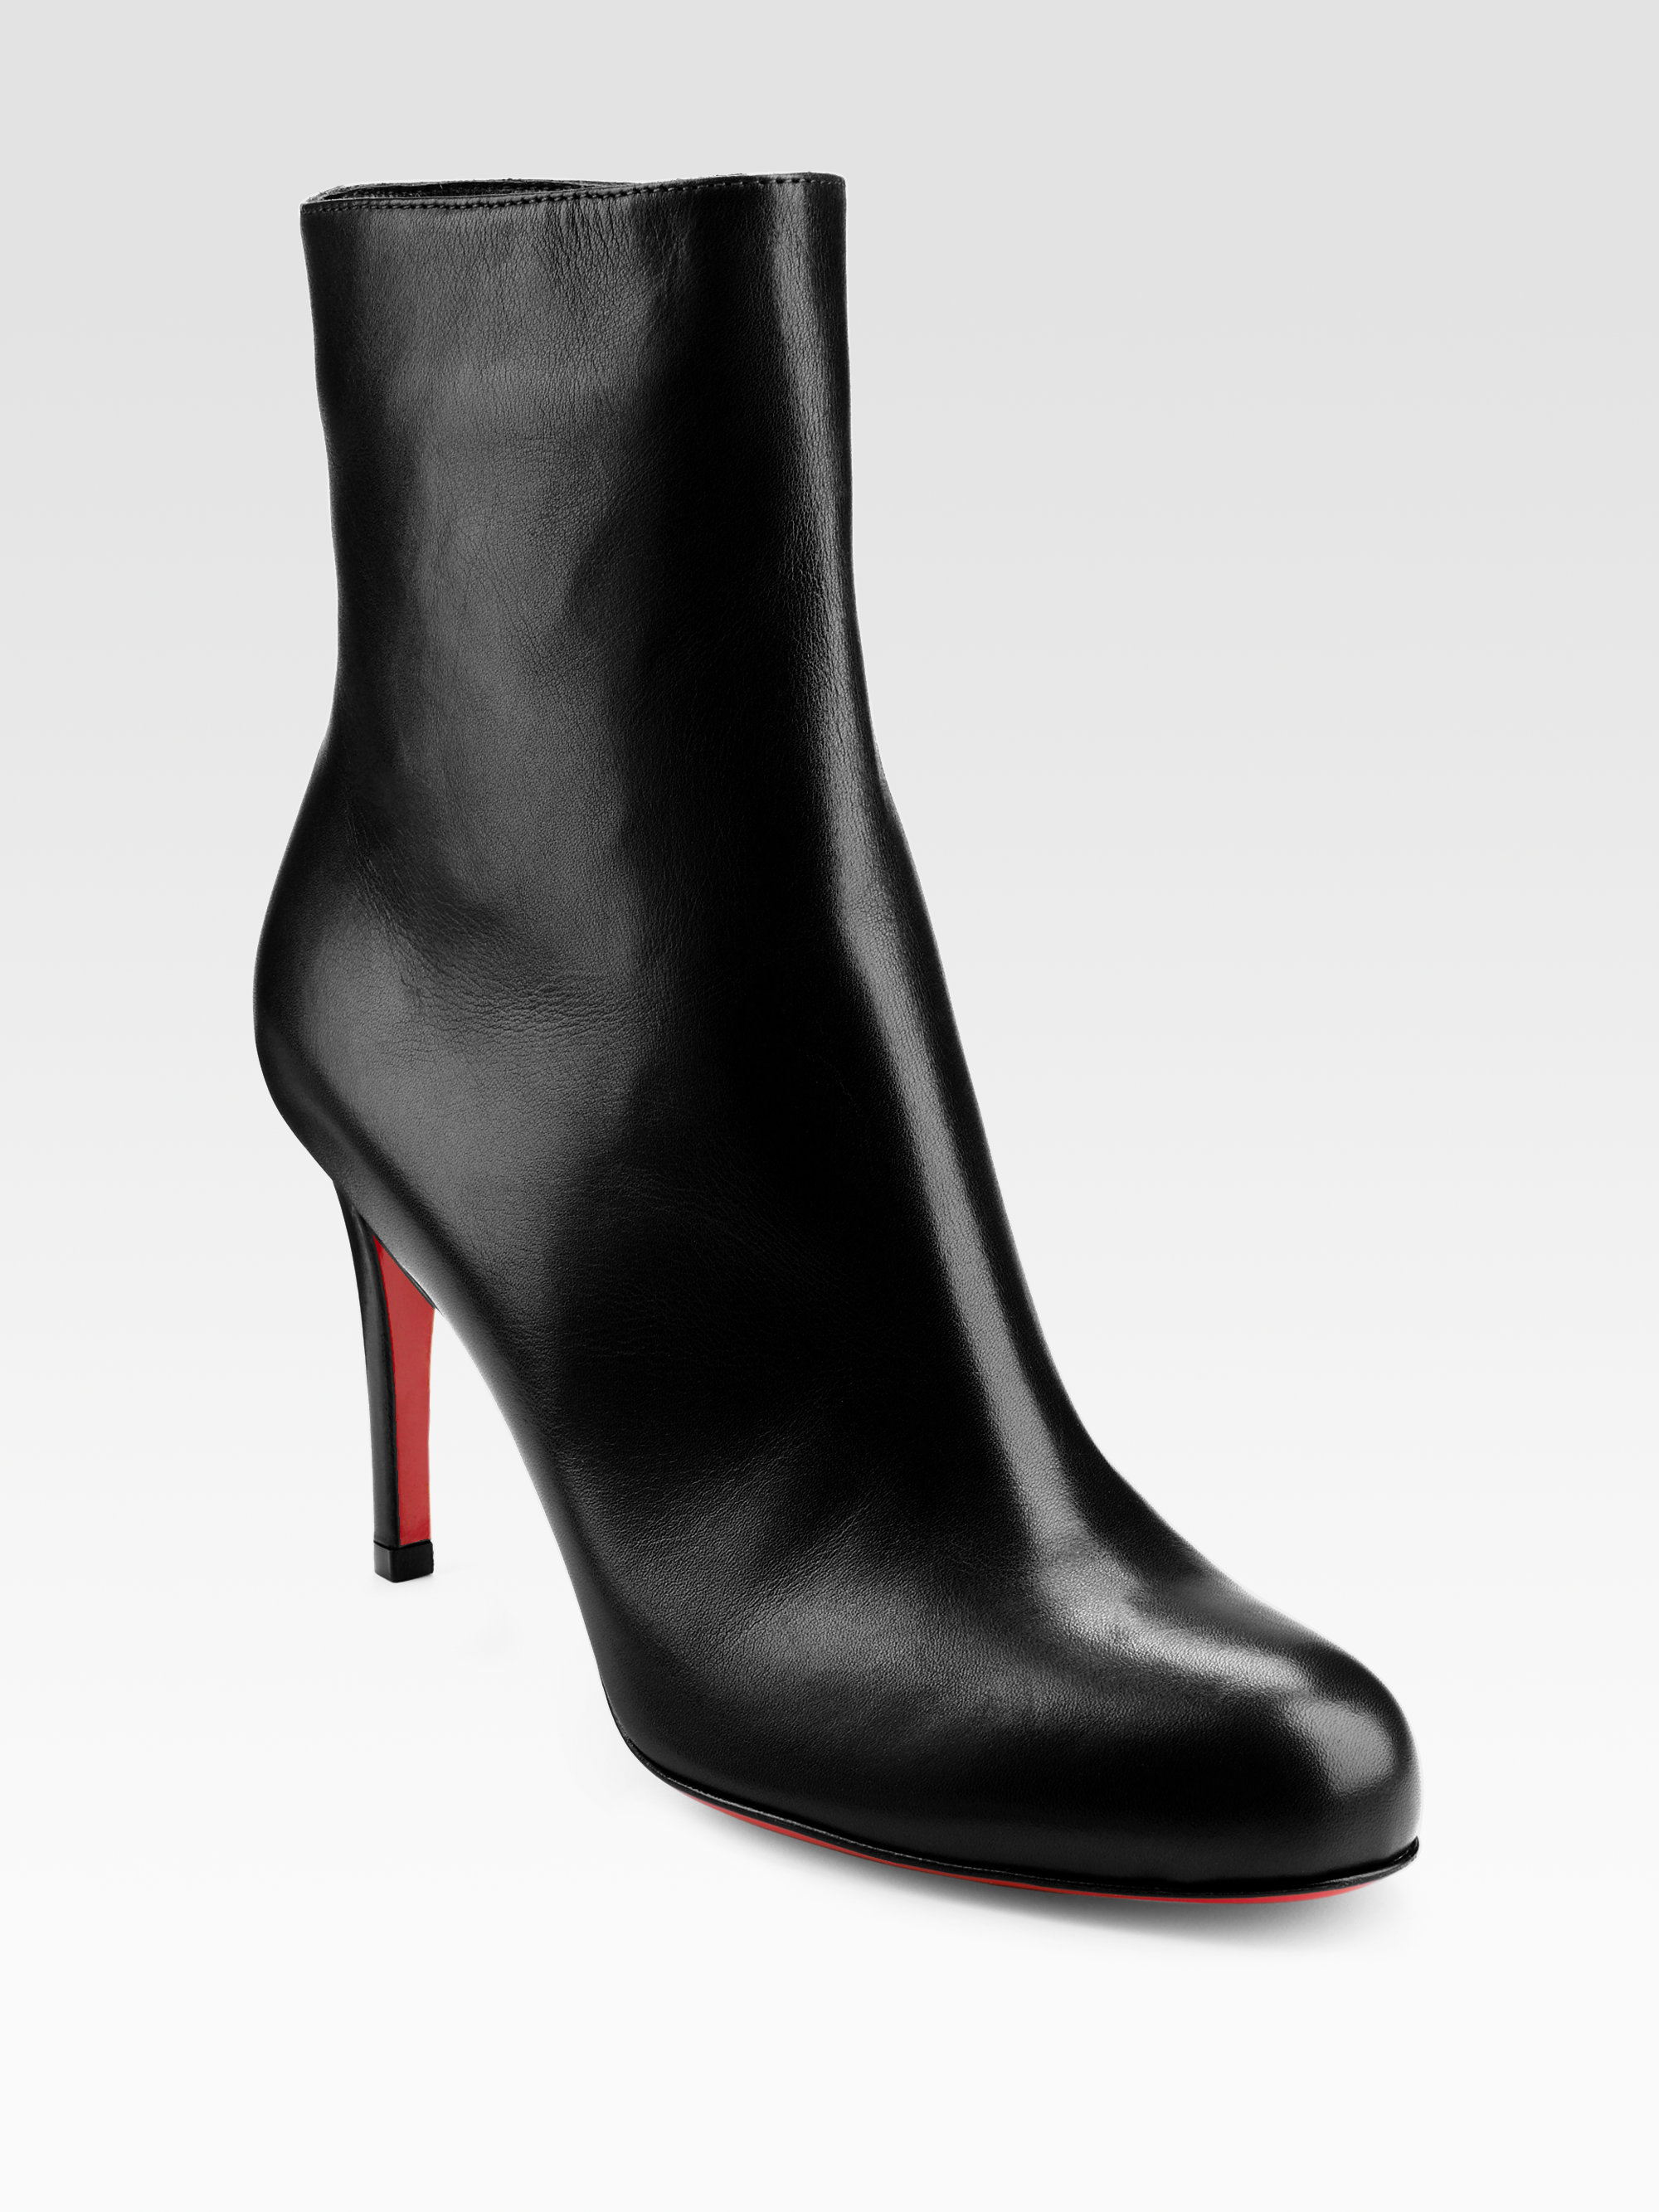 Christian louboutin Simple 85 Leather Ankle Boots in Black | Lyst